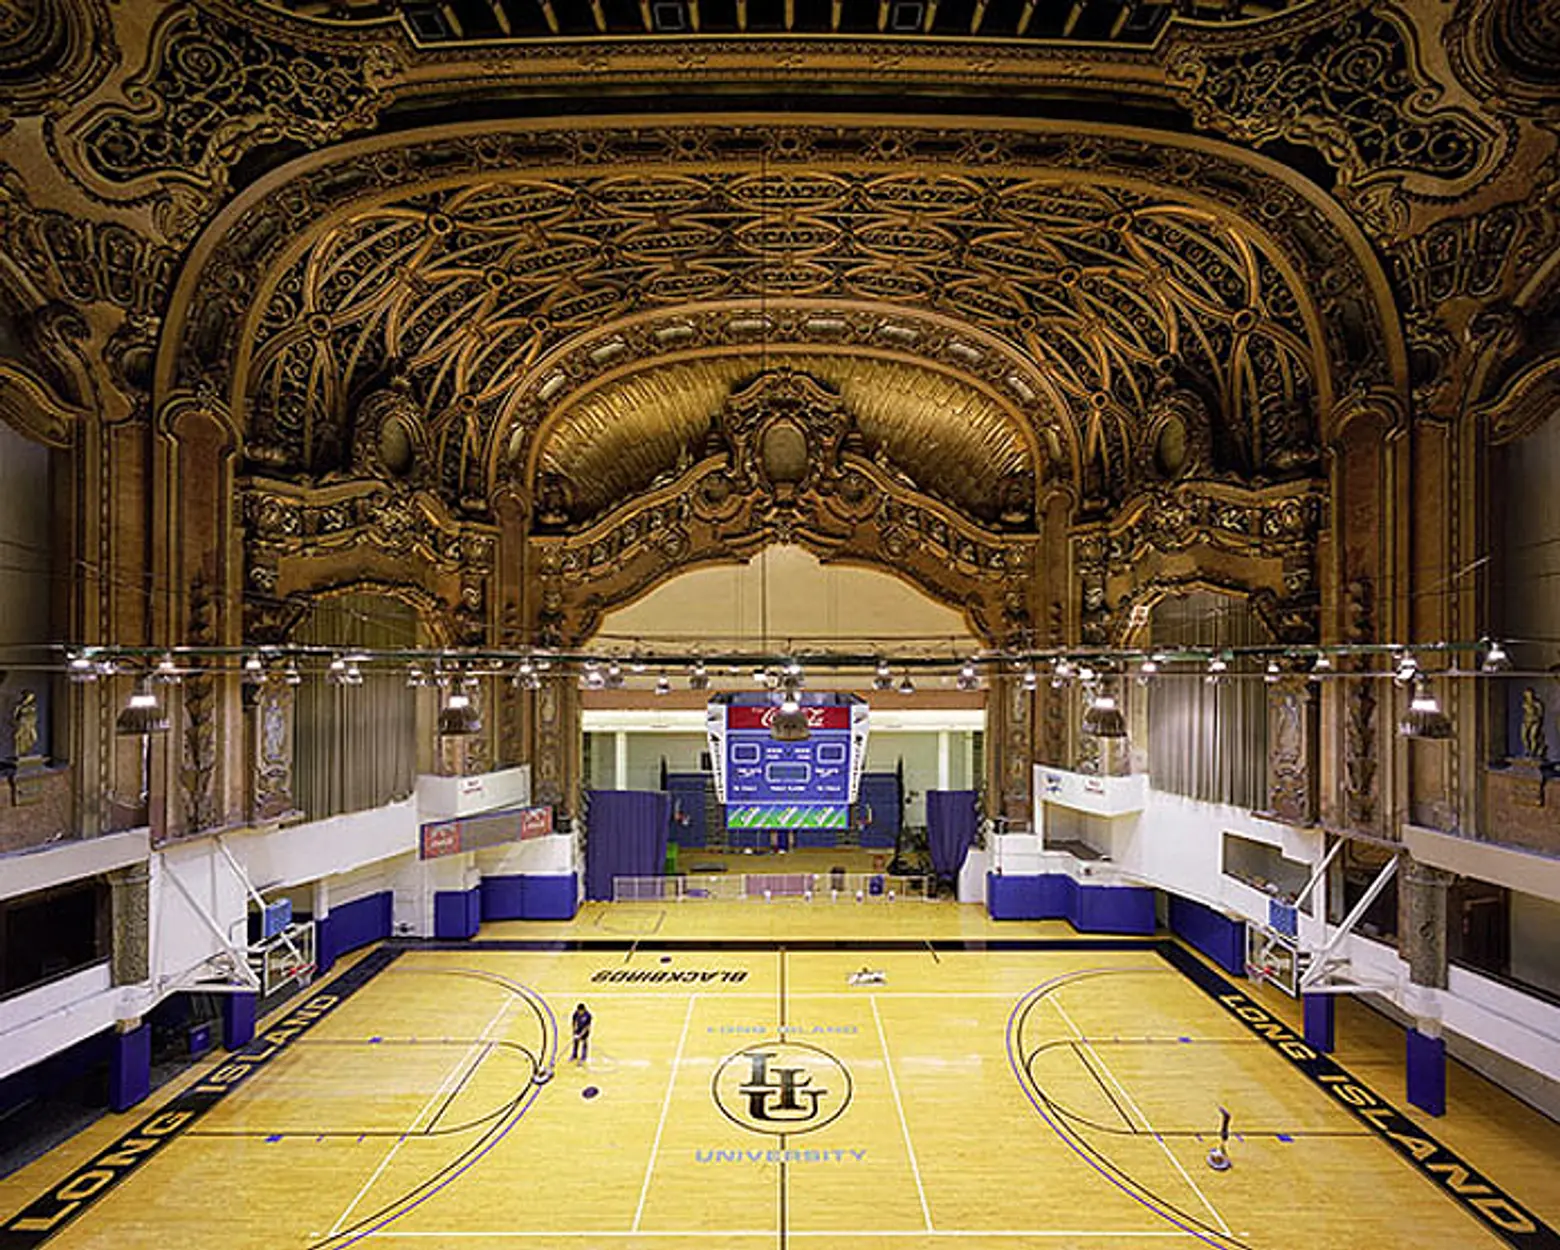 From Gilded Movie House to University Gym: Uncovering the Past of the Brooklyn Paramount Theatre